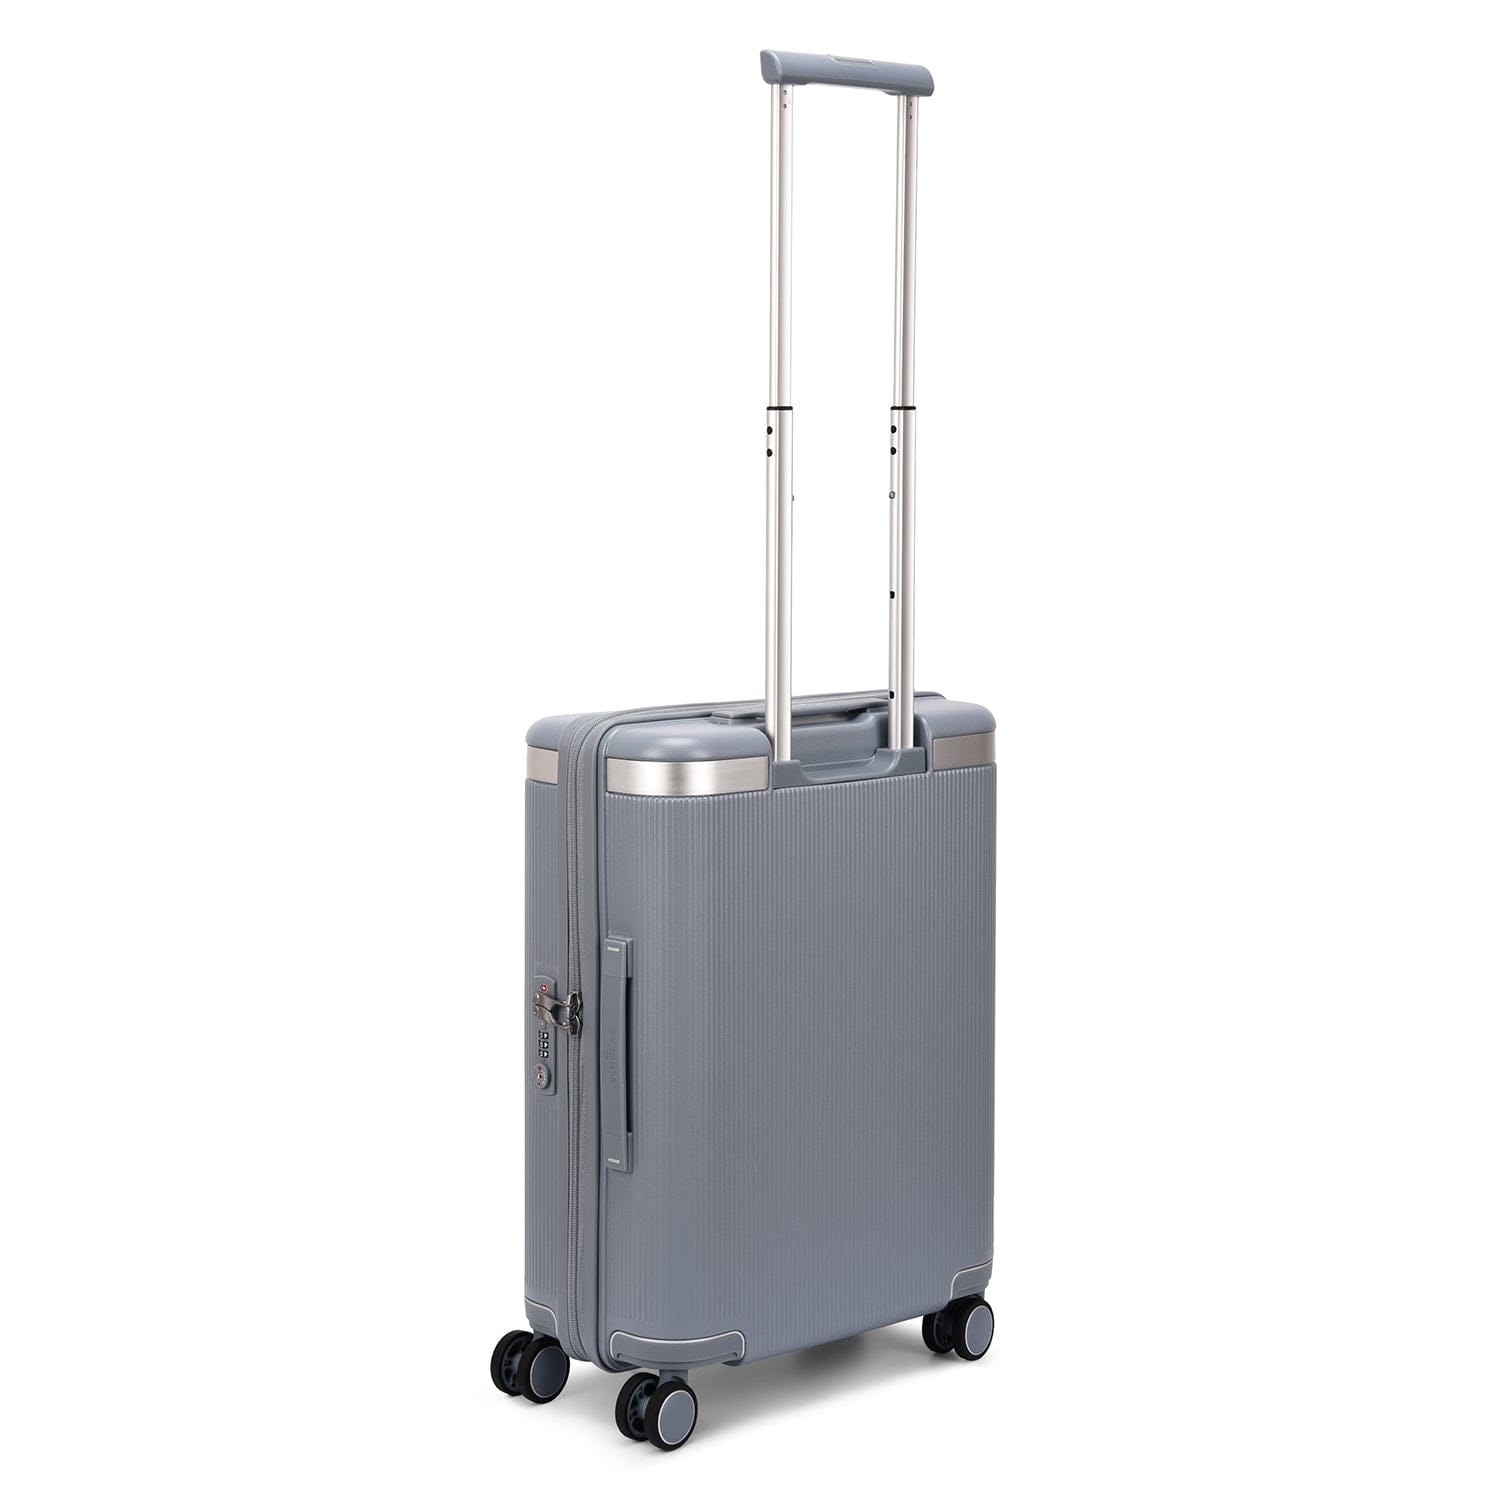 Echolac Dynasty 55cm Hardcase Non-Expandable 4 Double Wheel Cabin Luggage Trolley Ice Blue - PC142